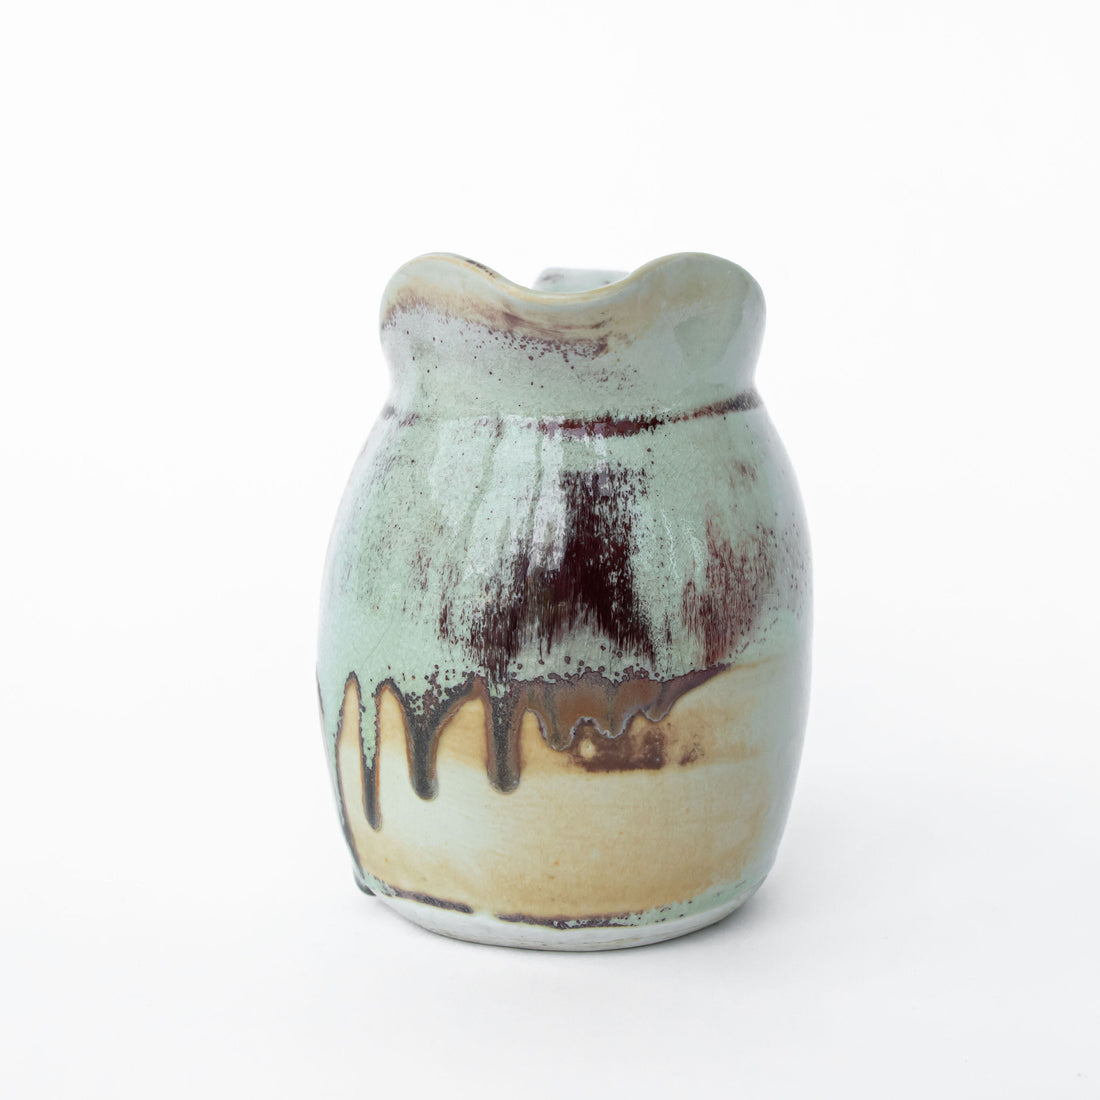 Ceramic Pitcher with Speckled Cream, Green and Blue Accenting